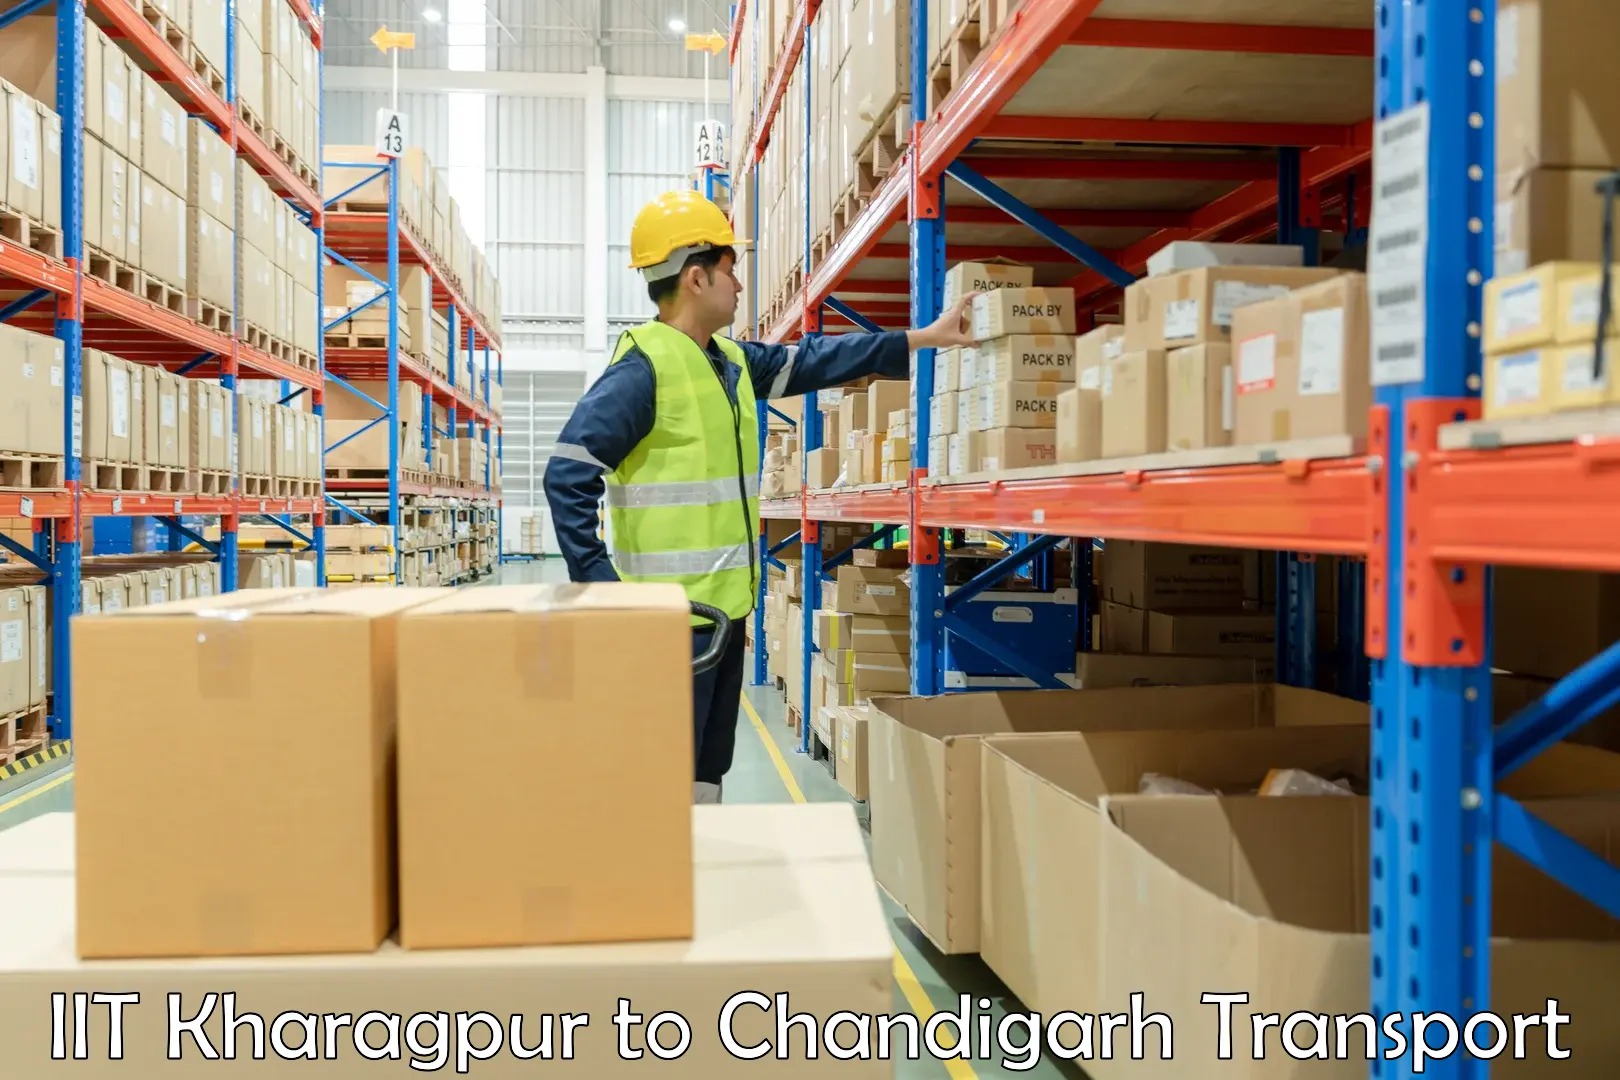 Truck transport companies in India IIT Kharagpur to Chandigarh